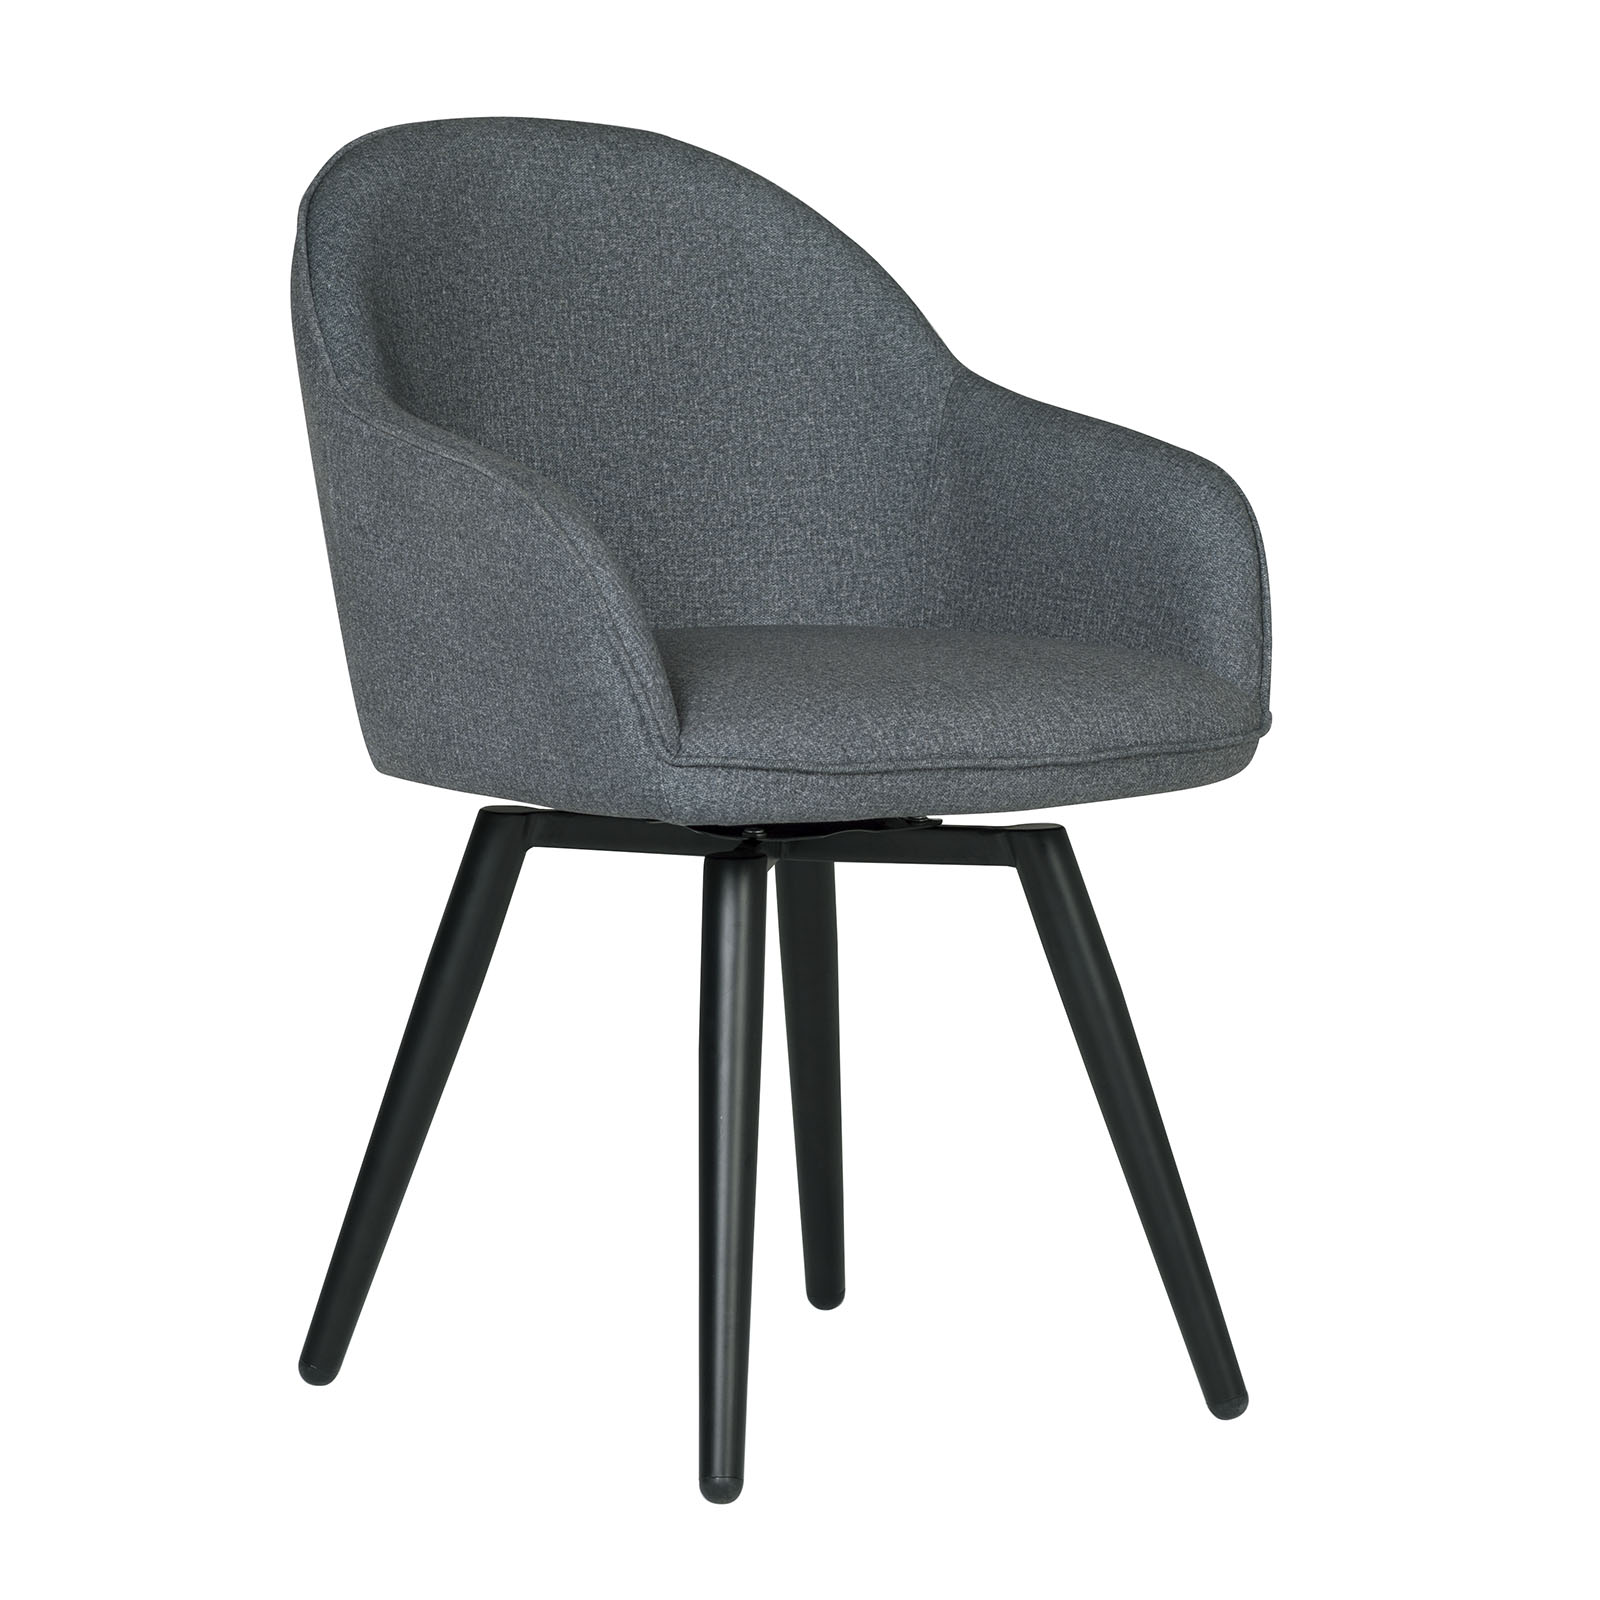 70178 Dome Chair